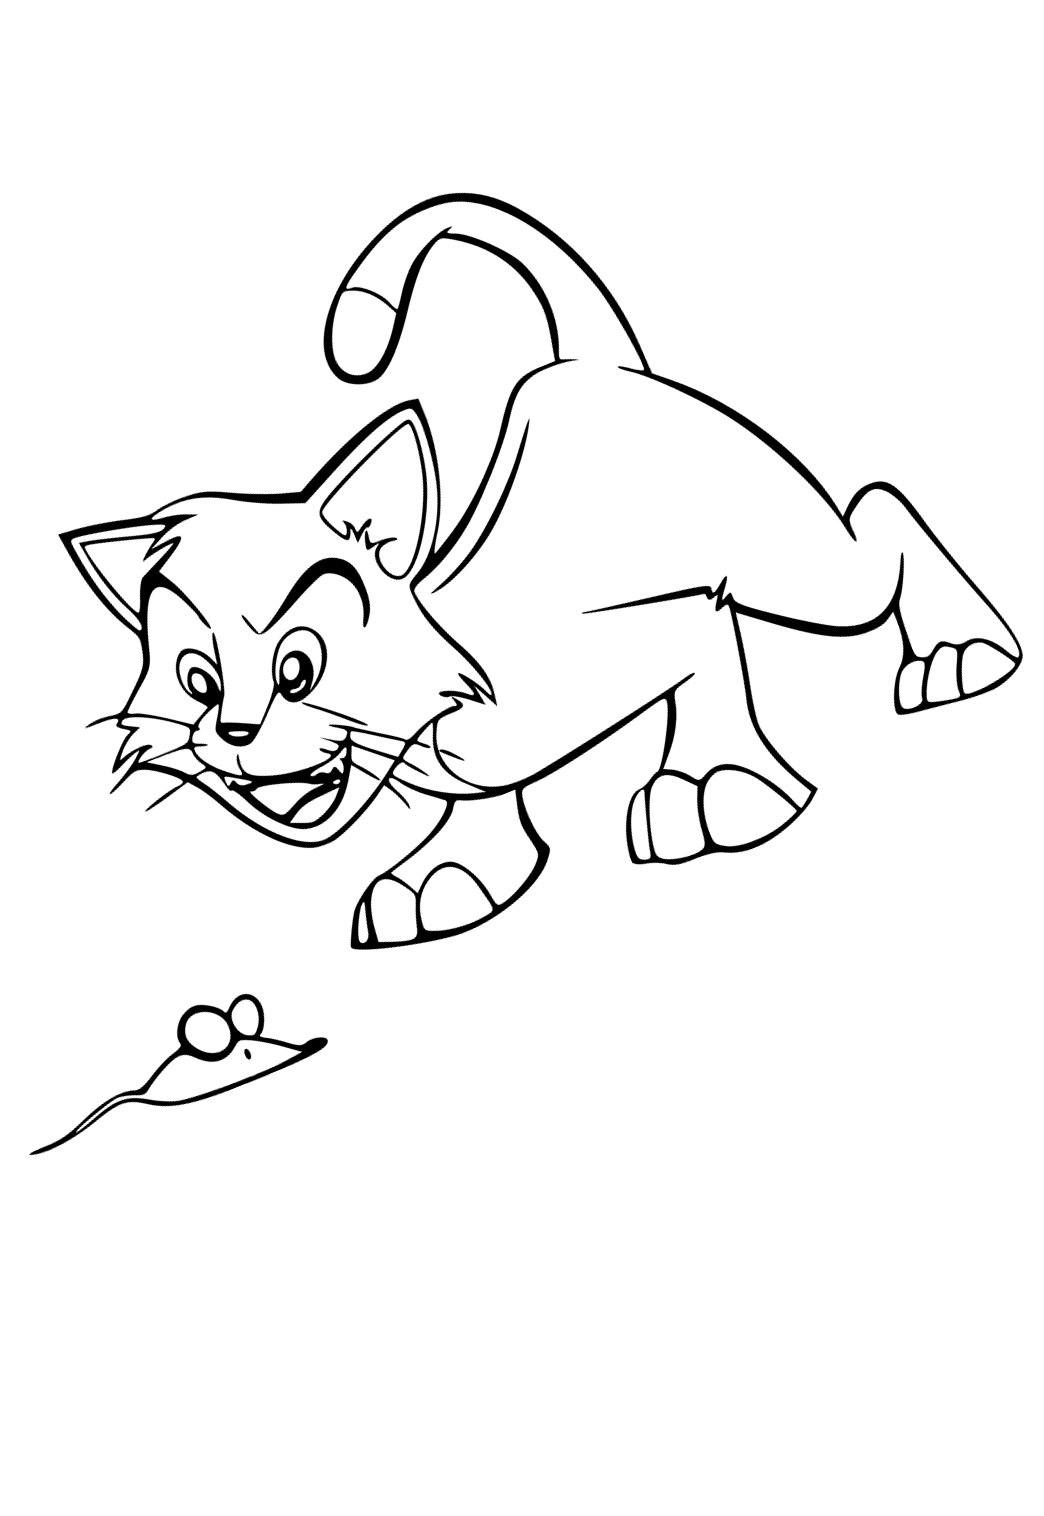 Free Printable Cartoon Cat Mouse Coloring Page for Adults and Kids